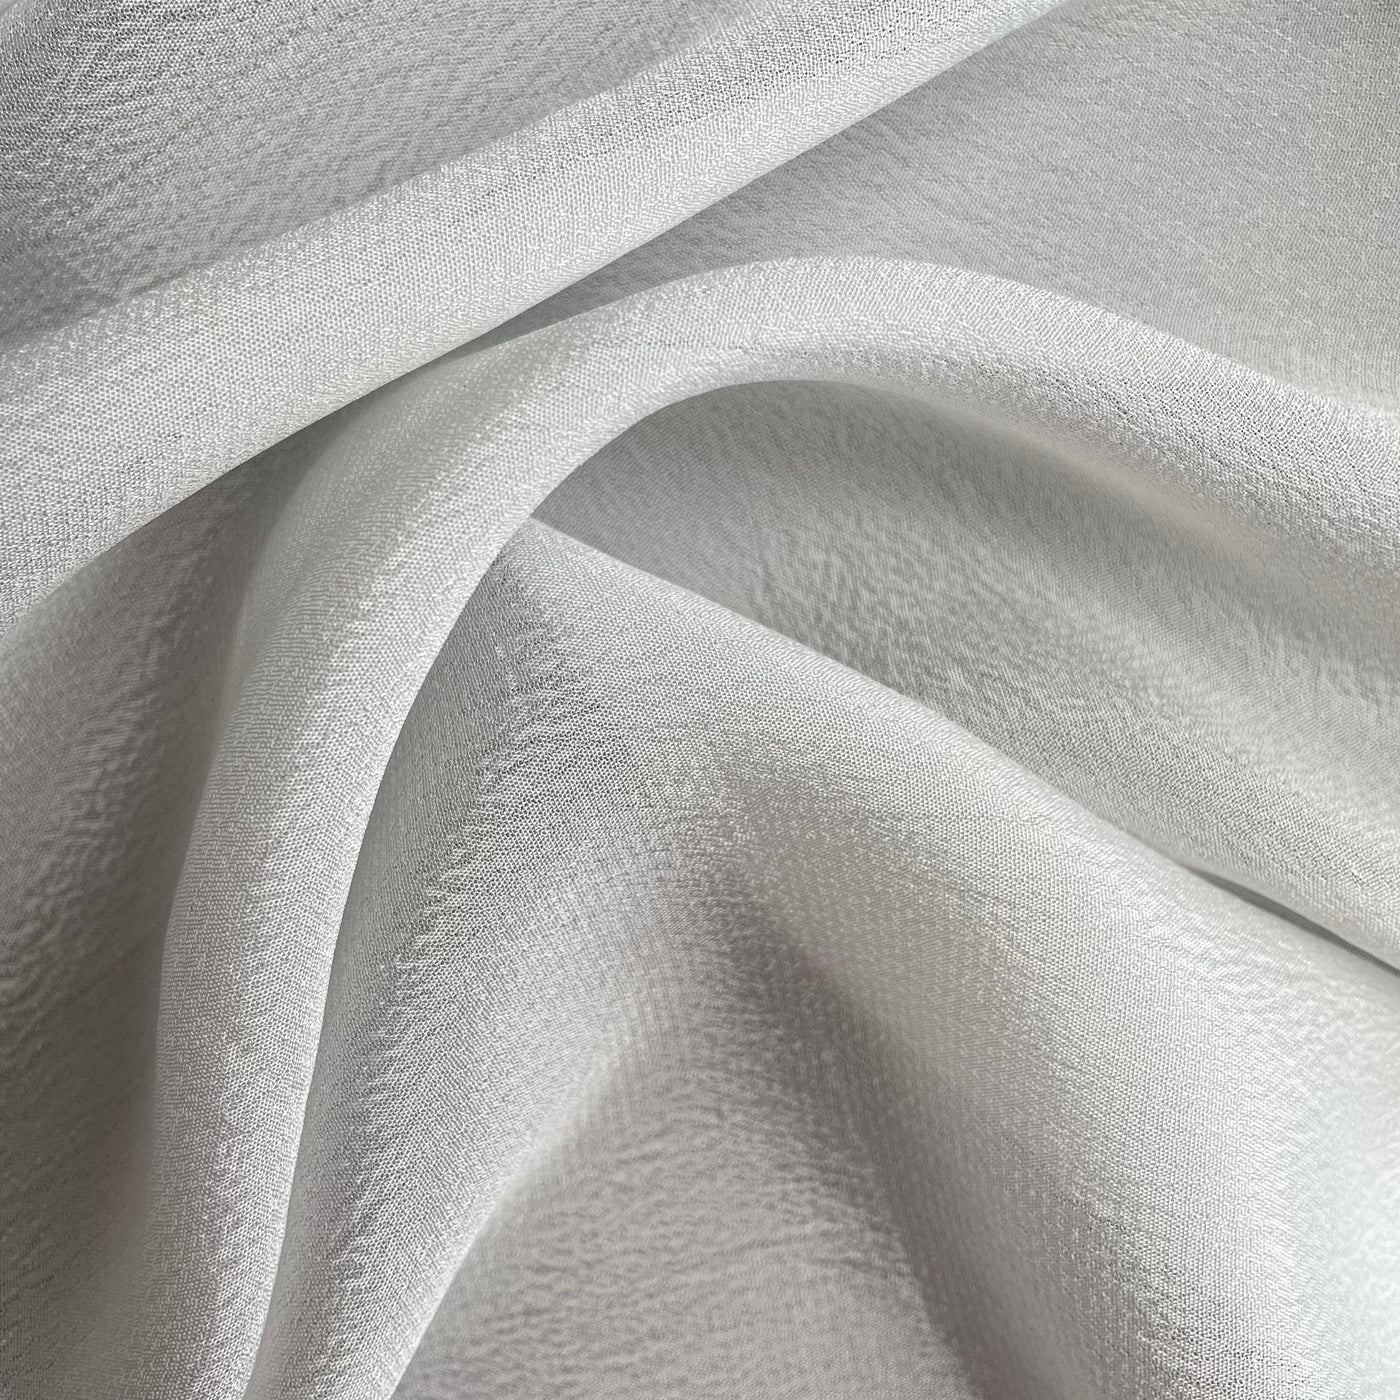 Dyeable Fabric Cut Piece (CUT PIECE) White Plain Dyeable Pure Bemberg Crepe Georgette Fabric (Width 44 inches)